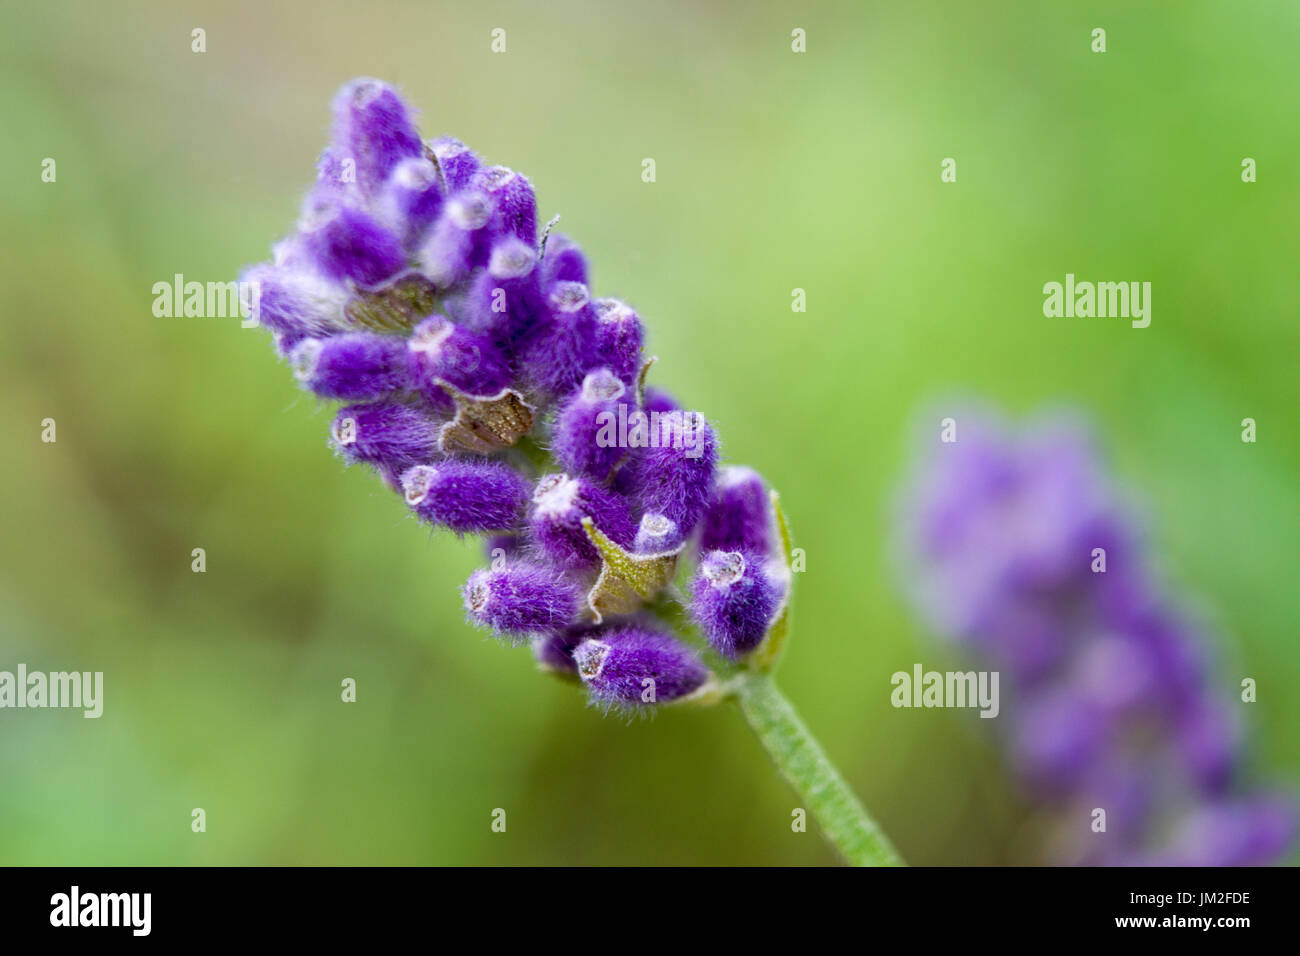 Macro of lavender flower. Small aromatic evergreen shrub of the mint family, with narrow leaves and bluish-purple flowers. Used in perfumery, medicine. Stock Photo